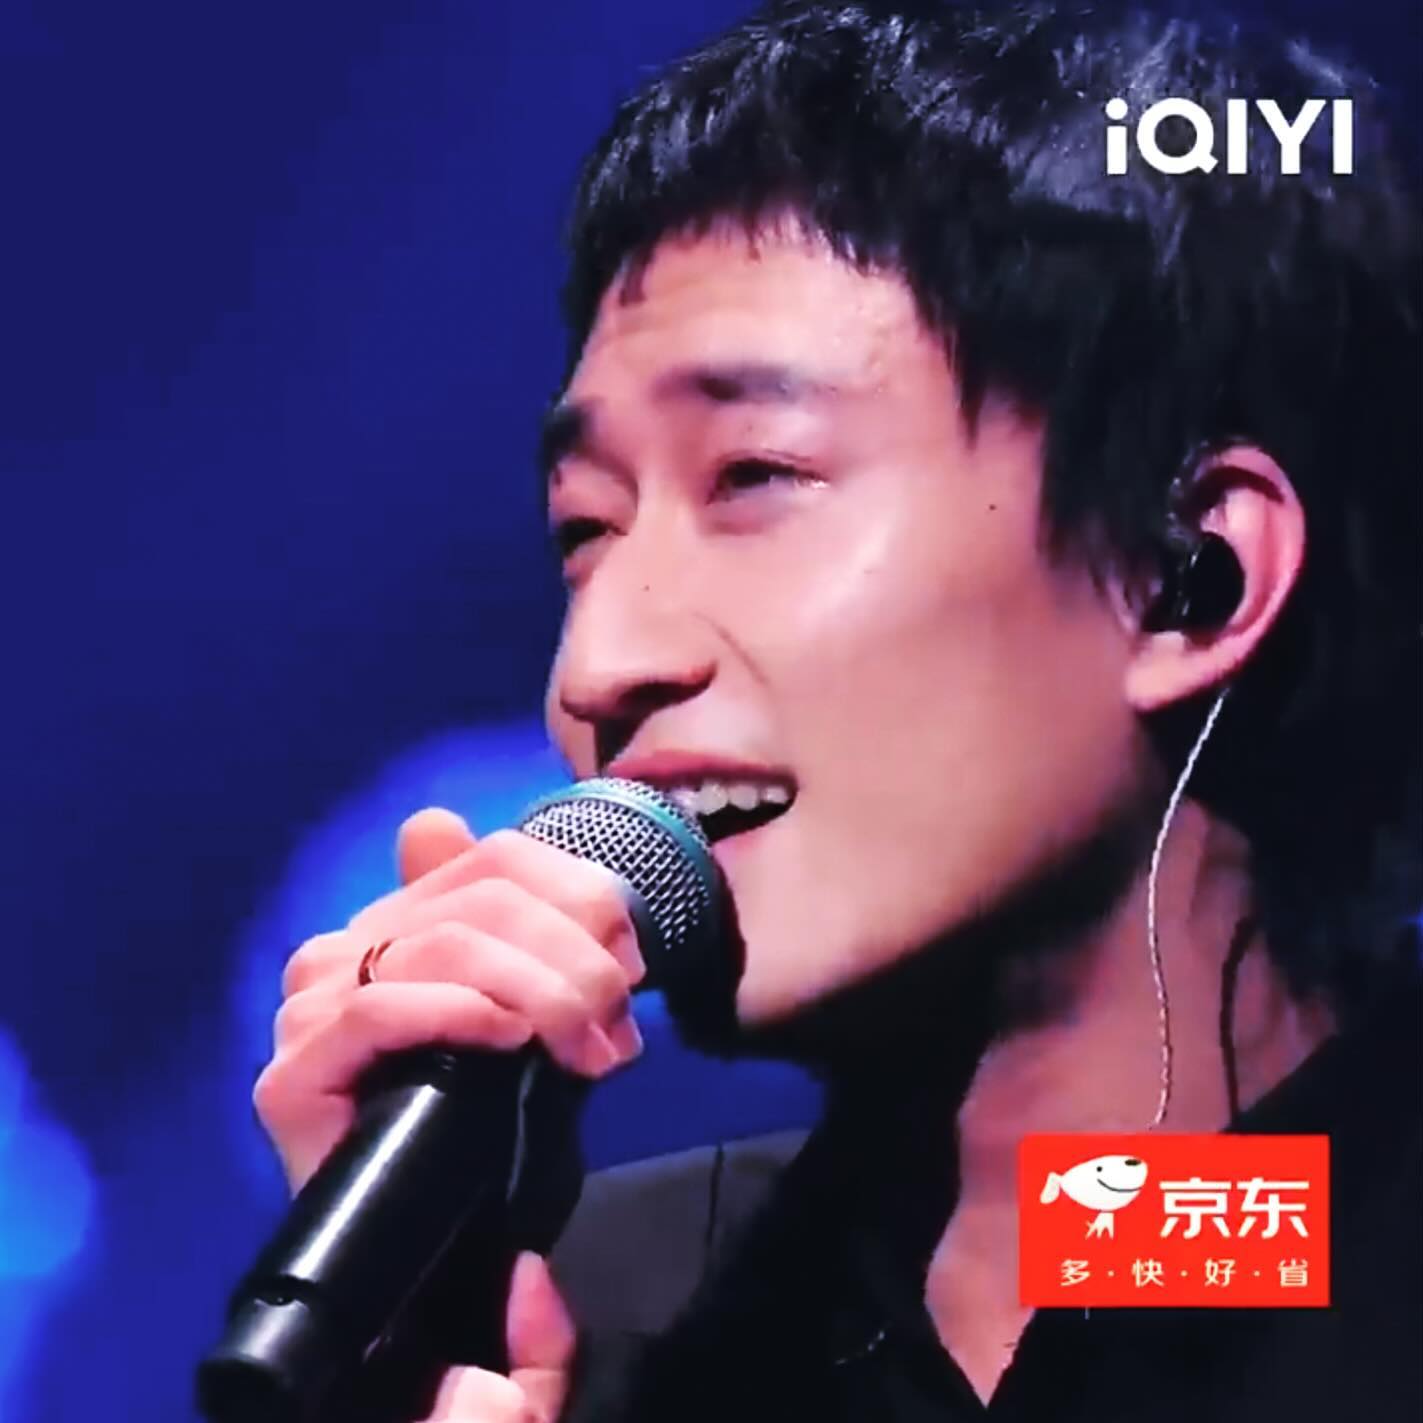 Watch this great performance by #回春丹, the song is #鲜花. Spend 8 minutes to watch the full video. https://t.ly/UtSuJ